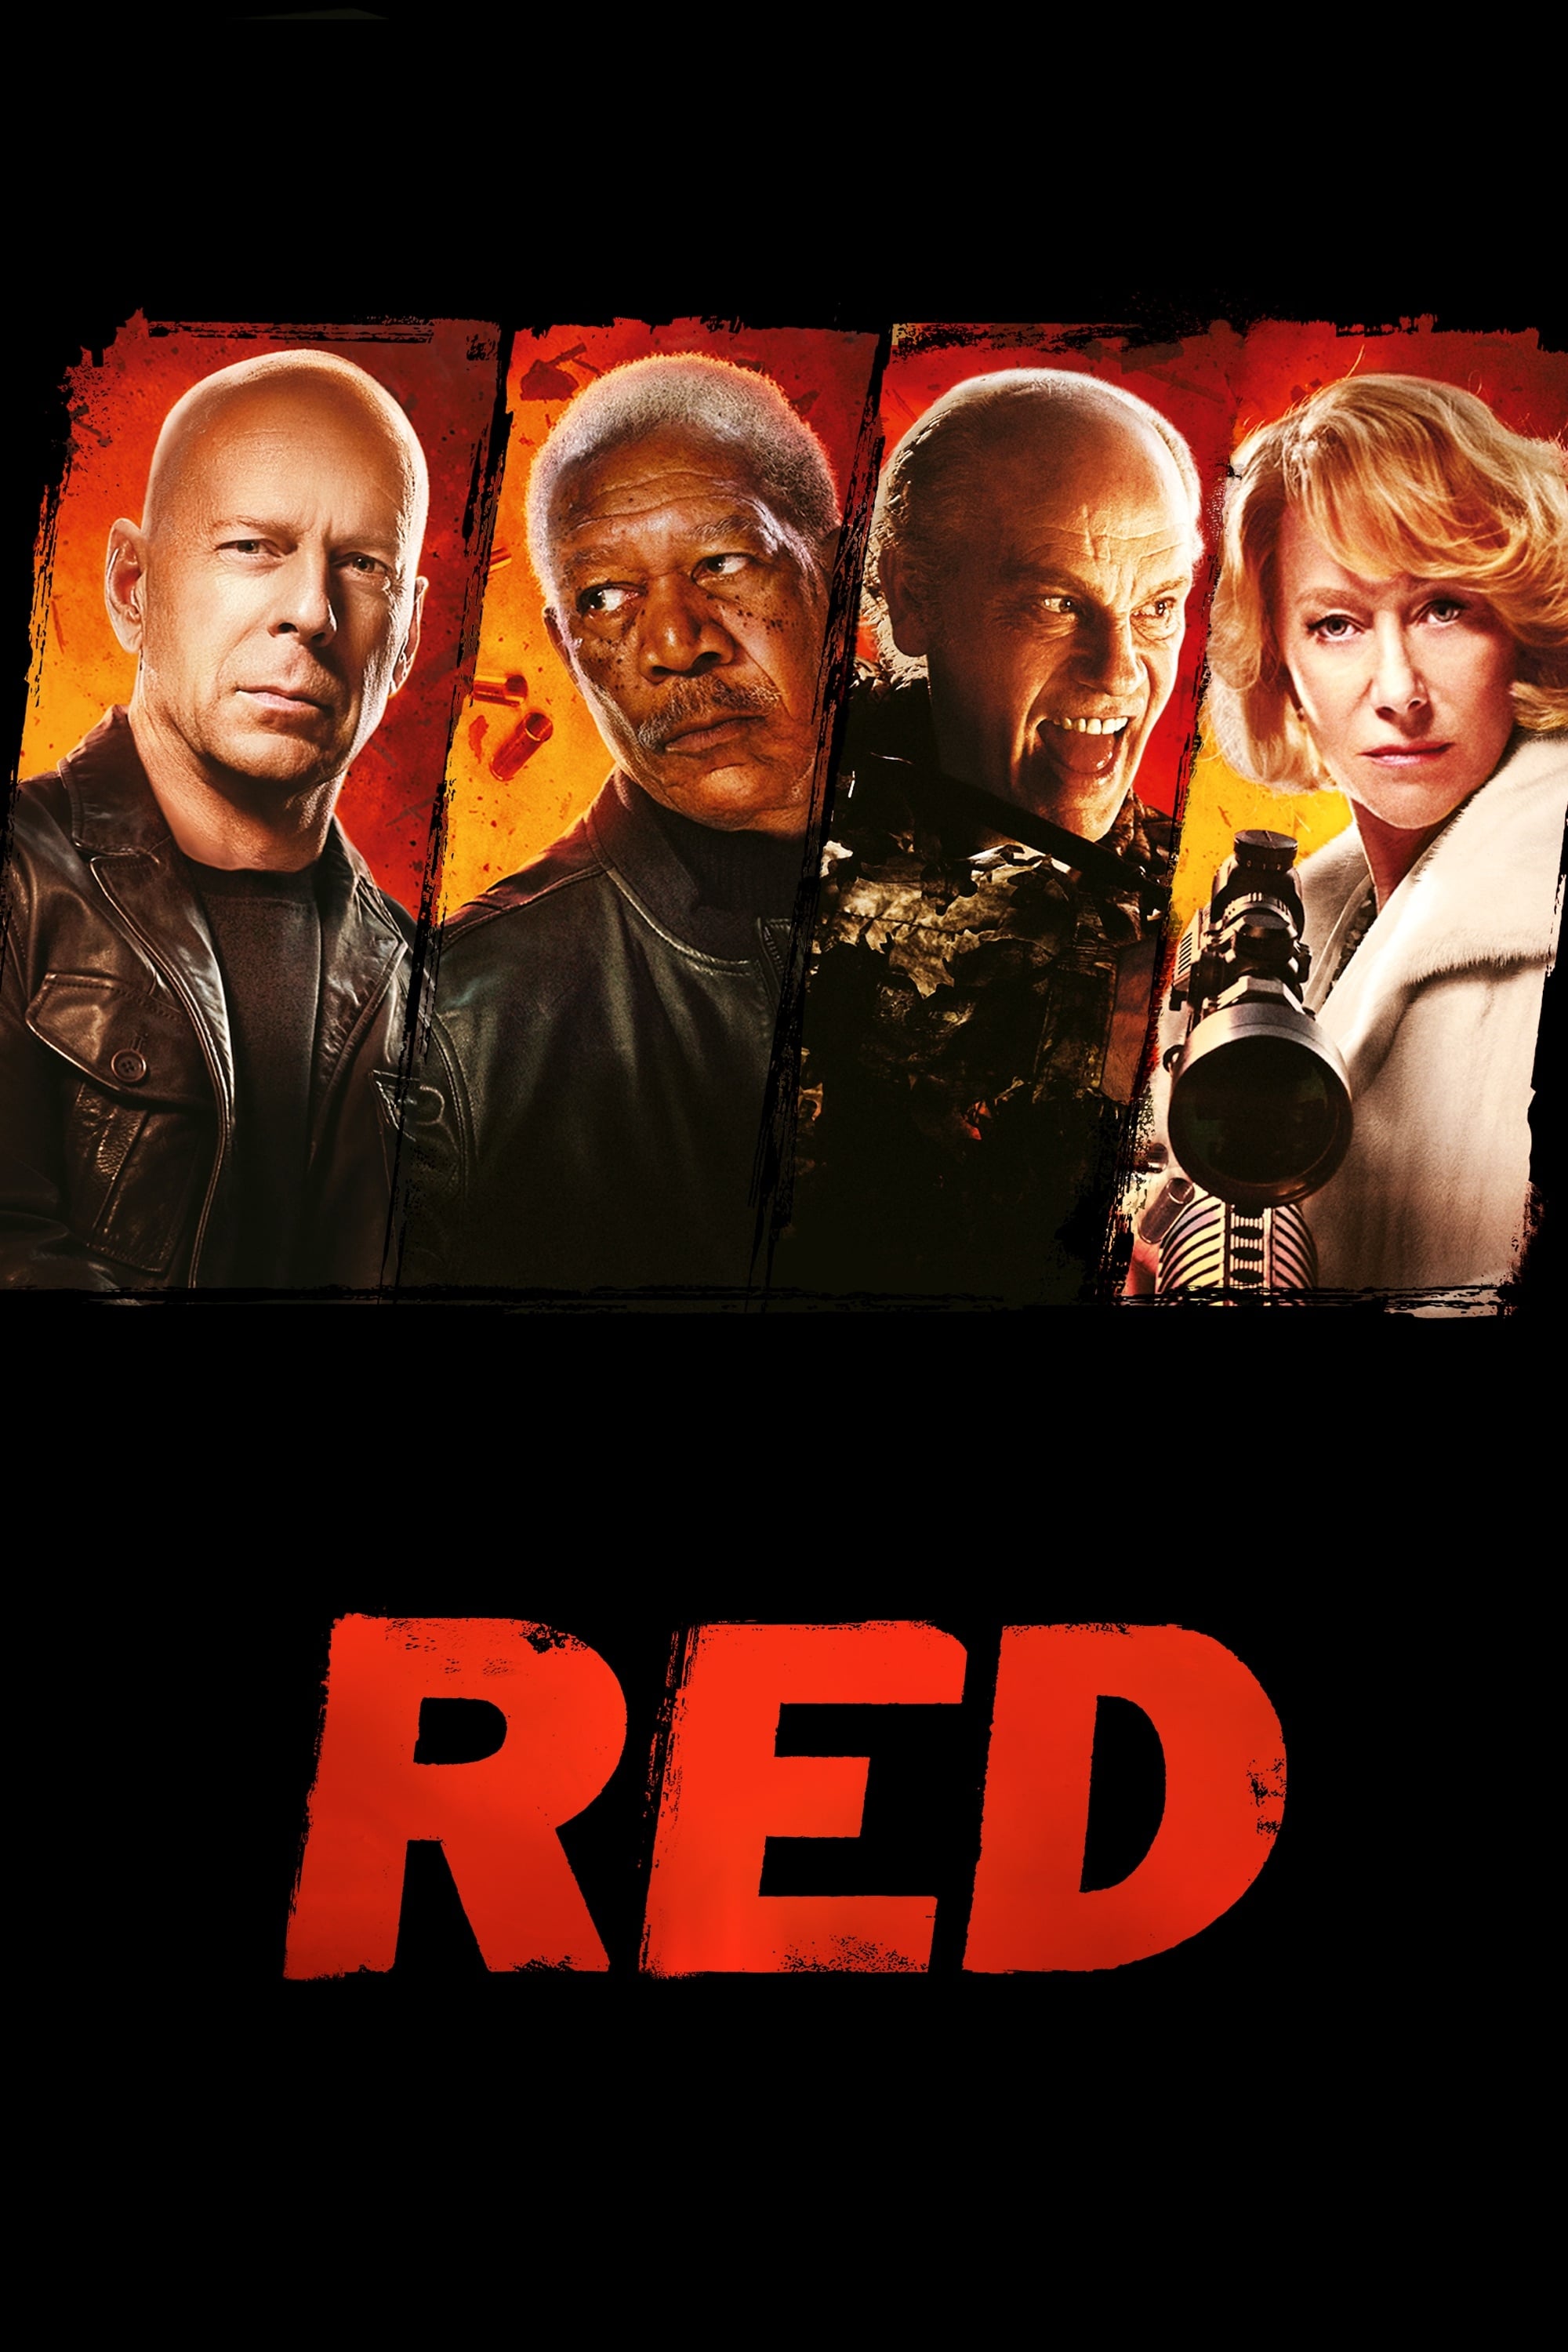 Red Cast - Red (2010) photo (16307383) - fanpop